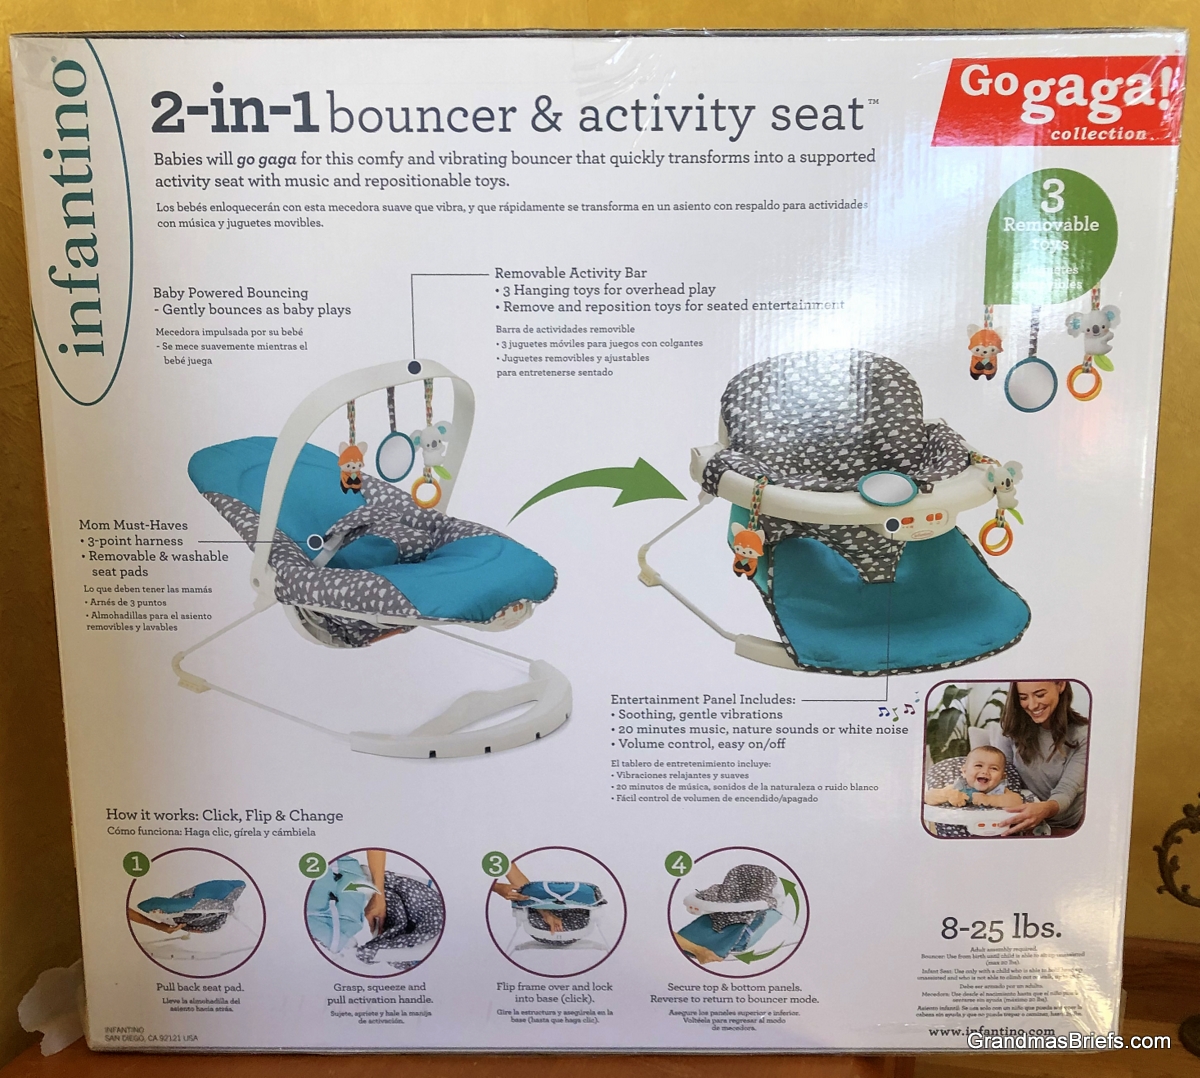 infantino gaga 2 in 1 bouncer and activity seat